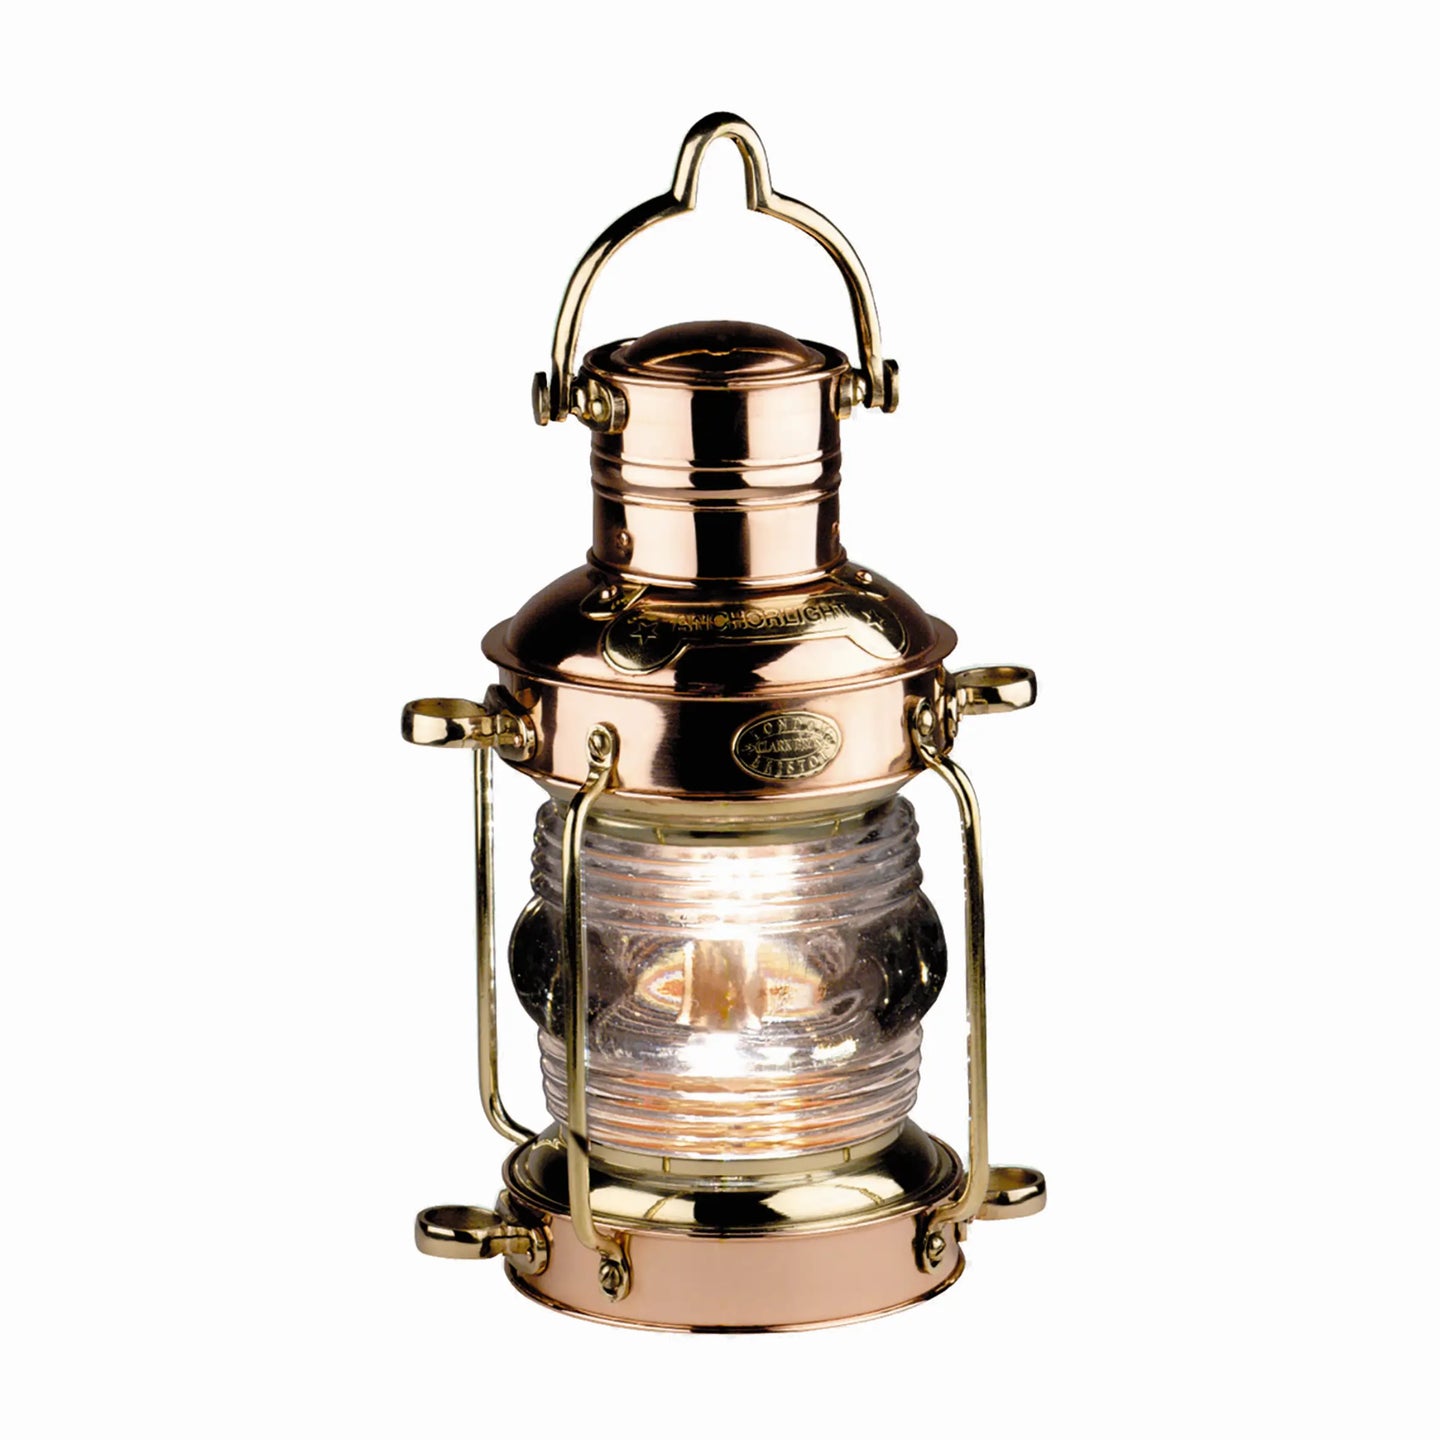 Authentic Models Anchor Lamp, Brass & Copper - SL043